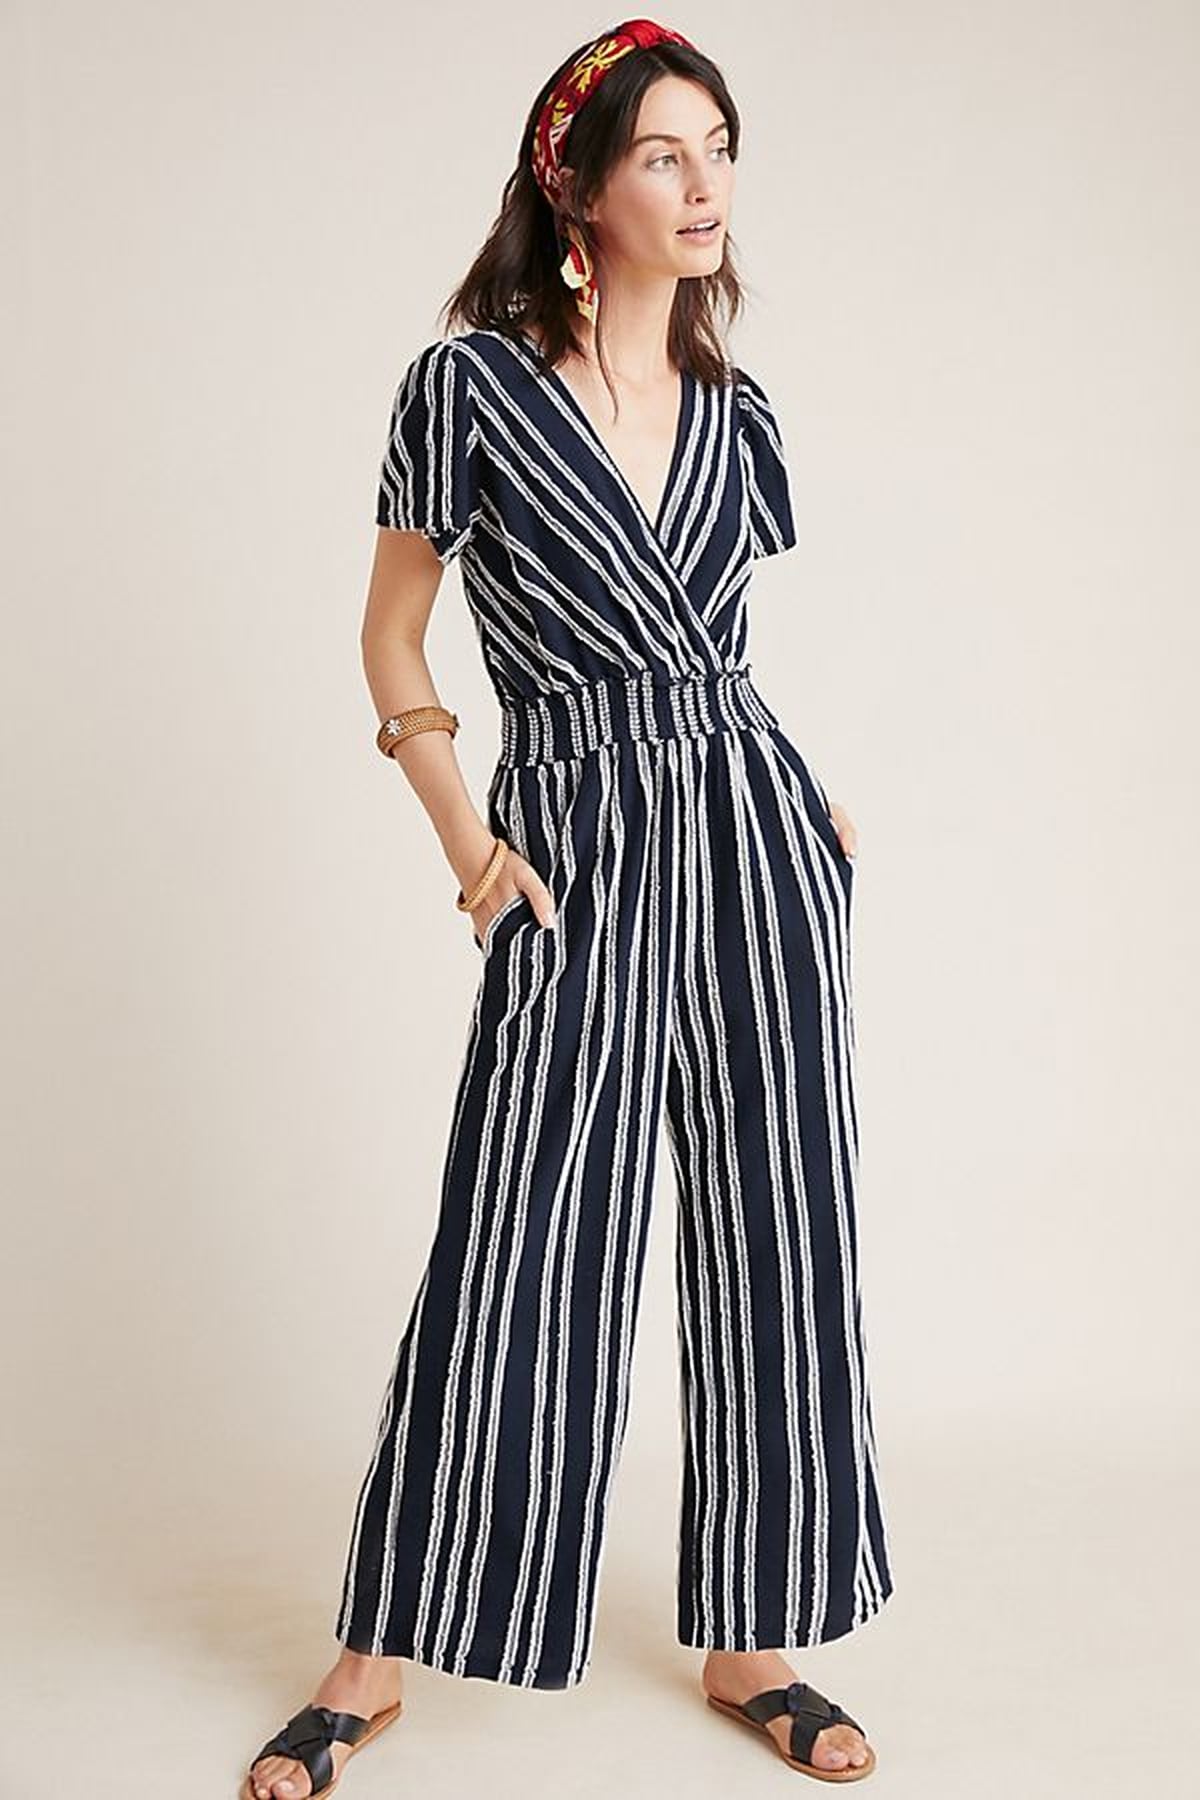 Best Jumpsuits and Rompers From Anthropologie | POPSUGAR Fashion